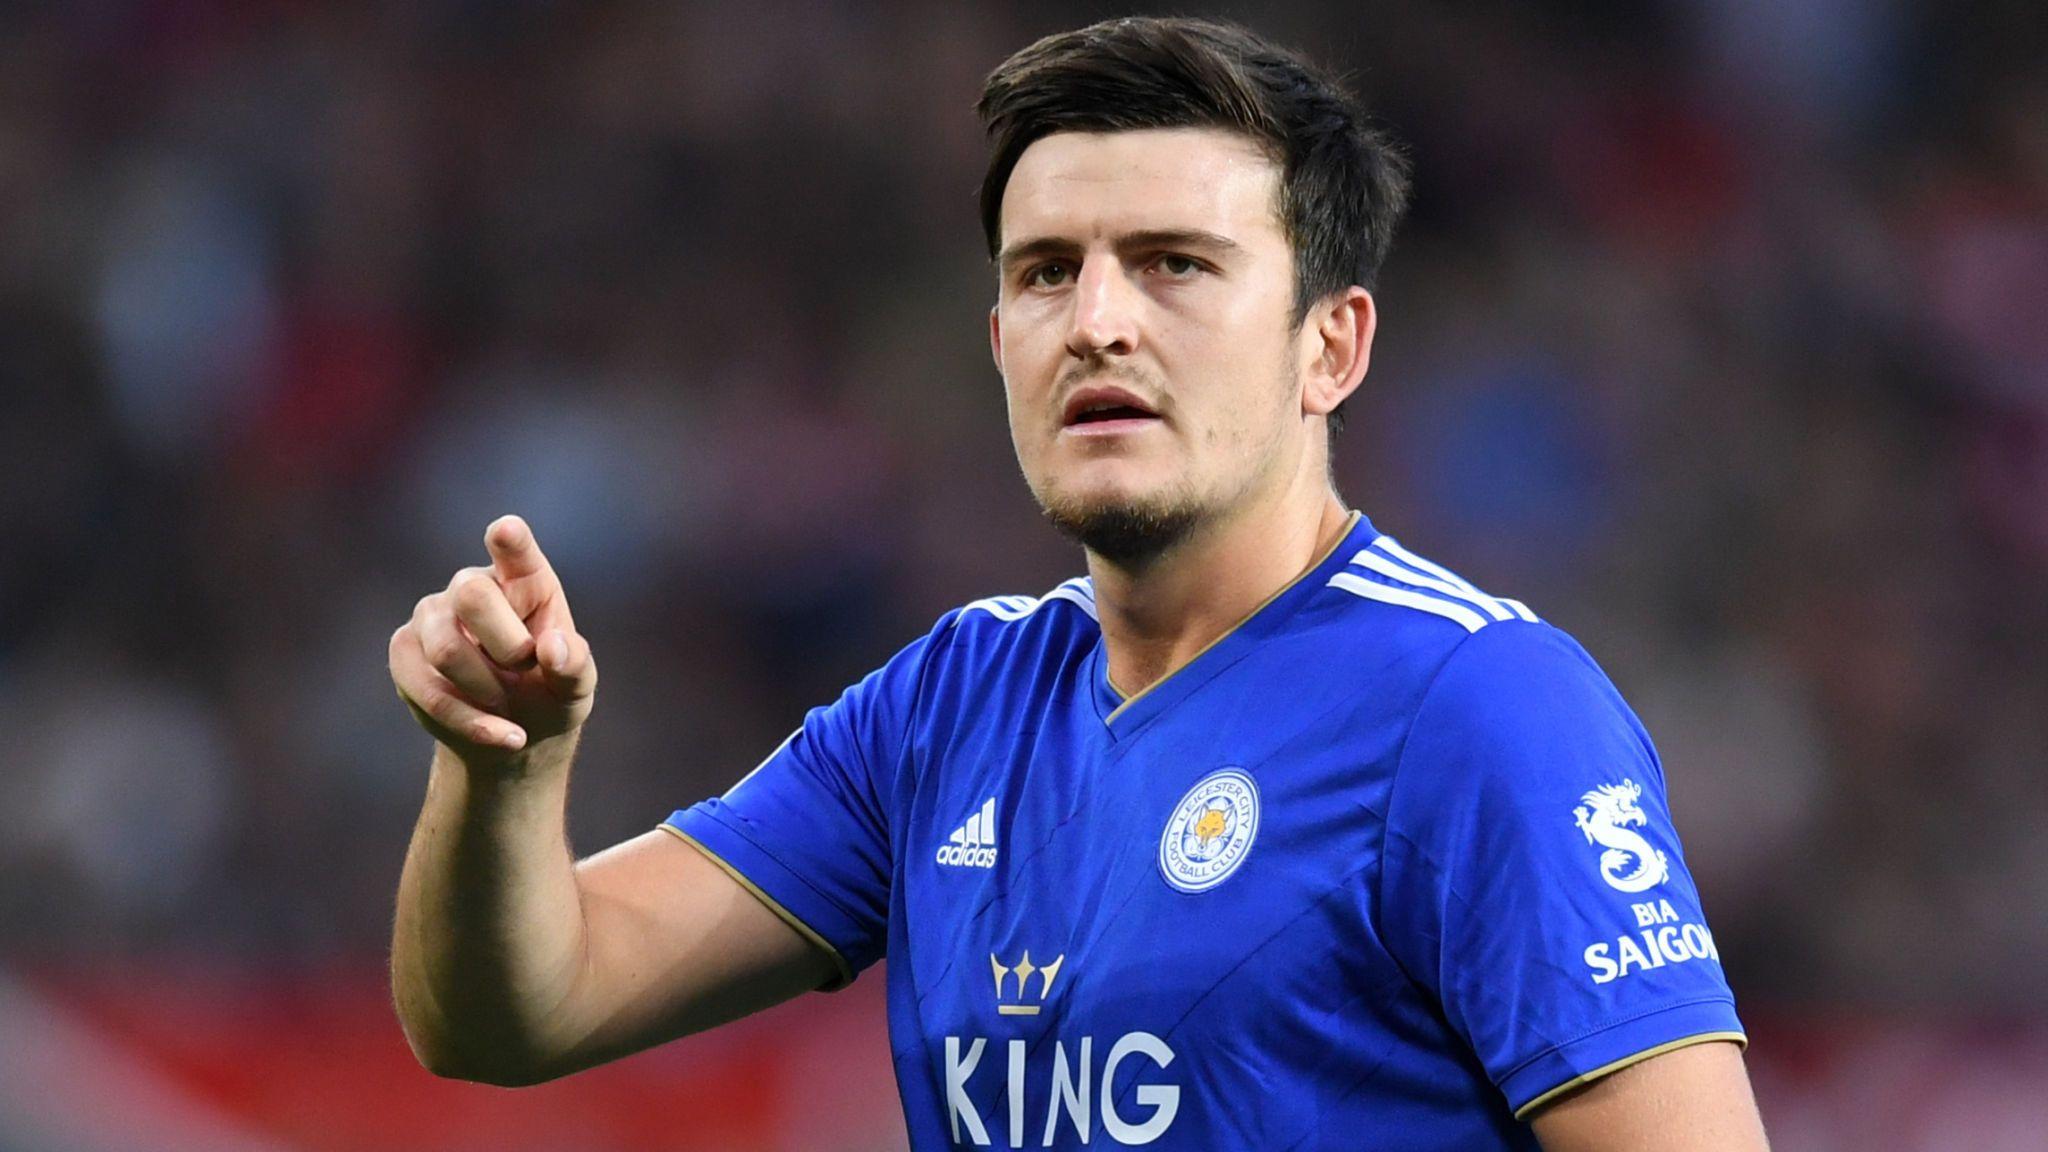 Man City and Man Utd willing to pay £65m for Harry Maguire